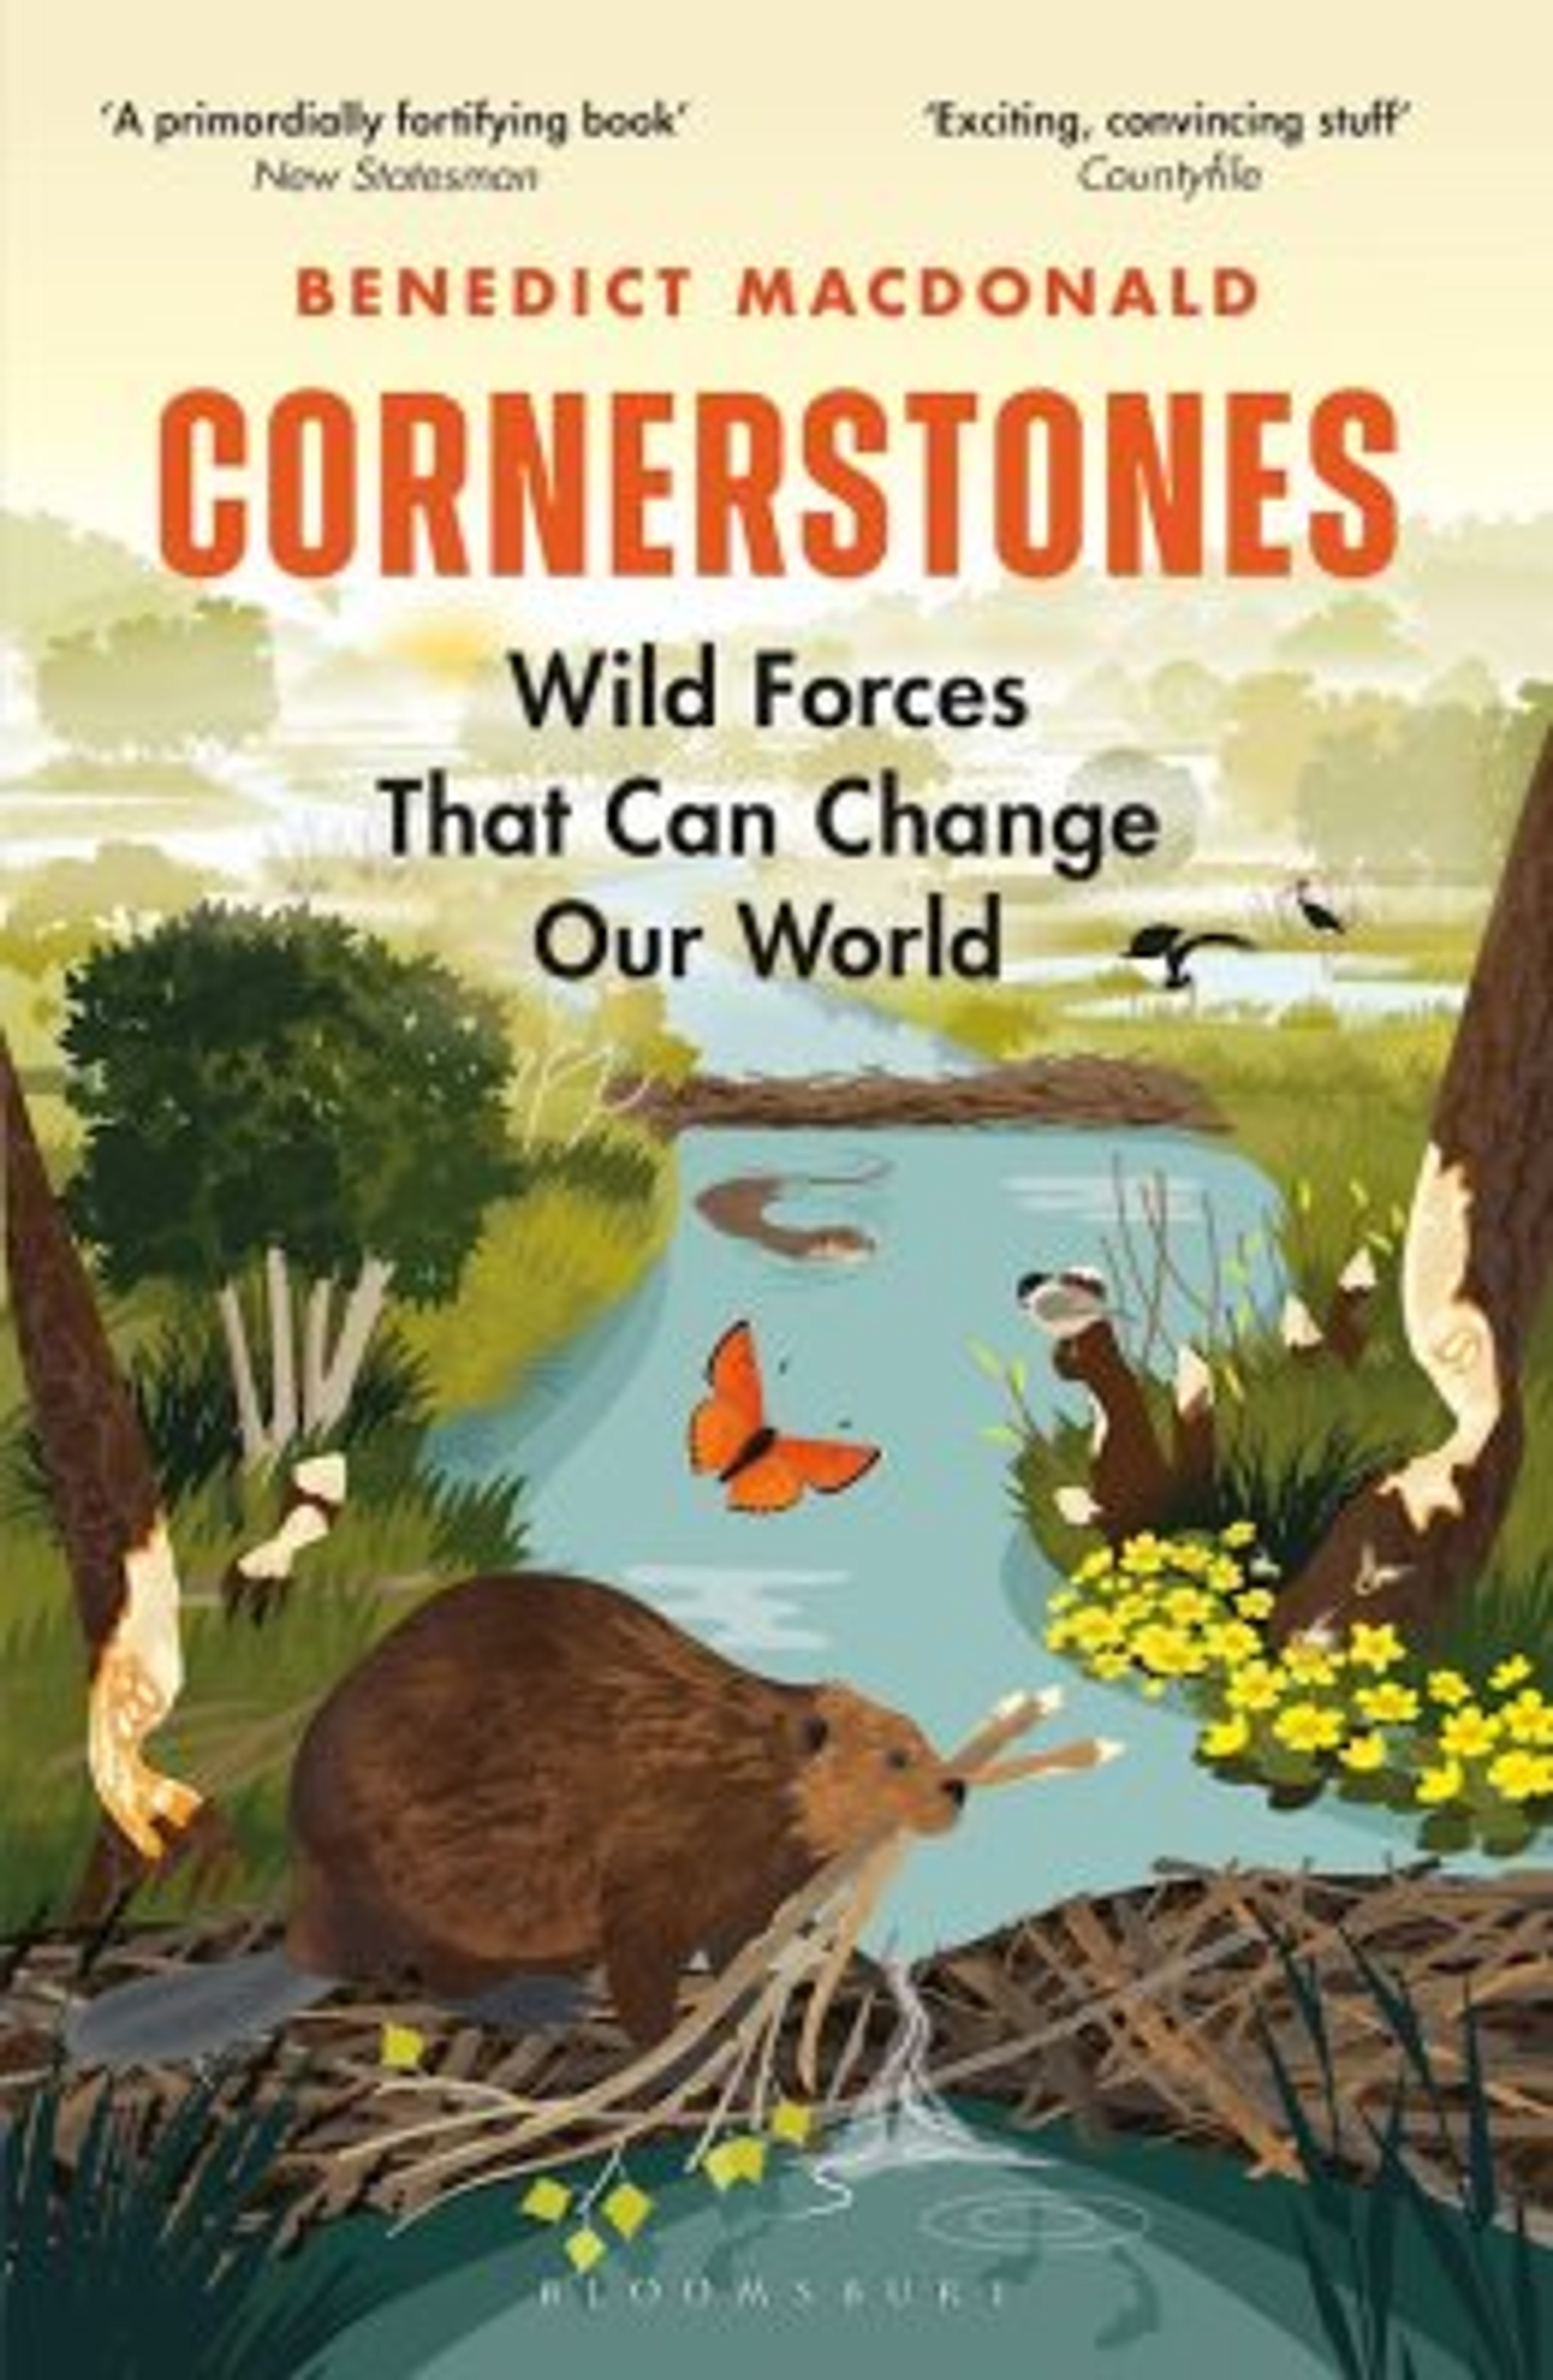 Our　Cornerstones:　That　World　Wild　Change　Forces　Can　Reads　NHBS　Good